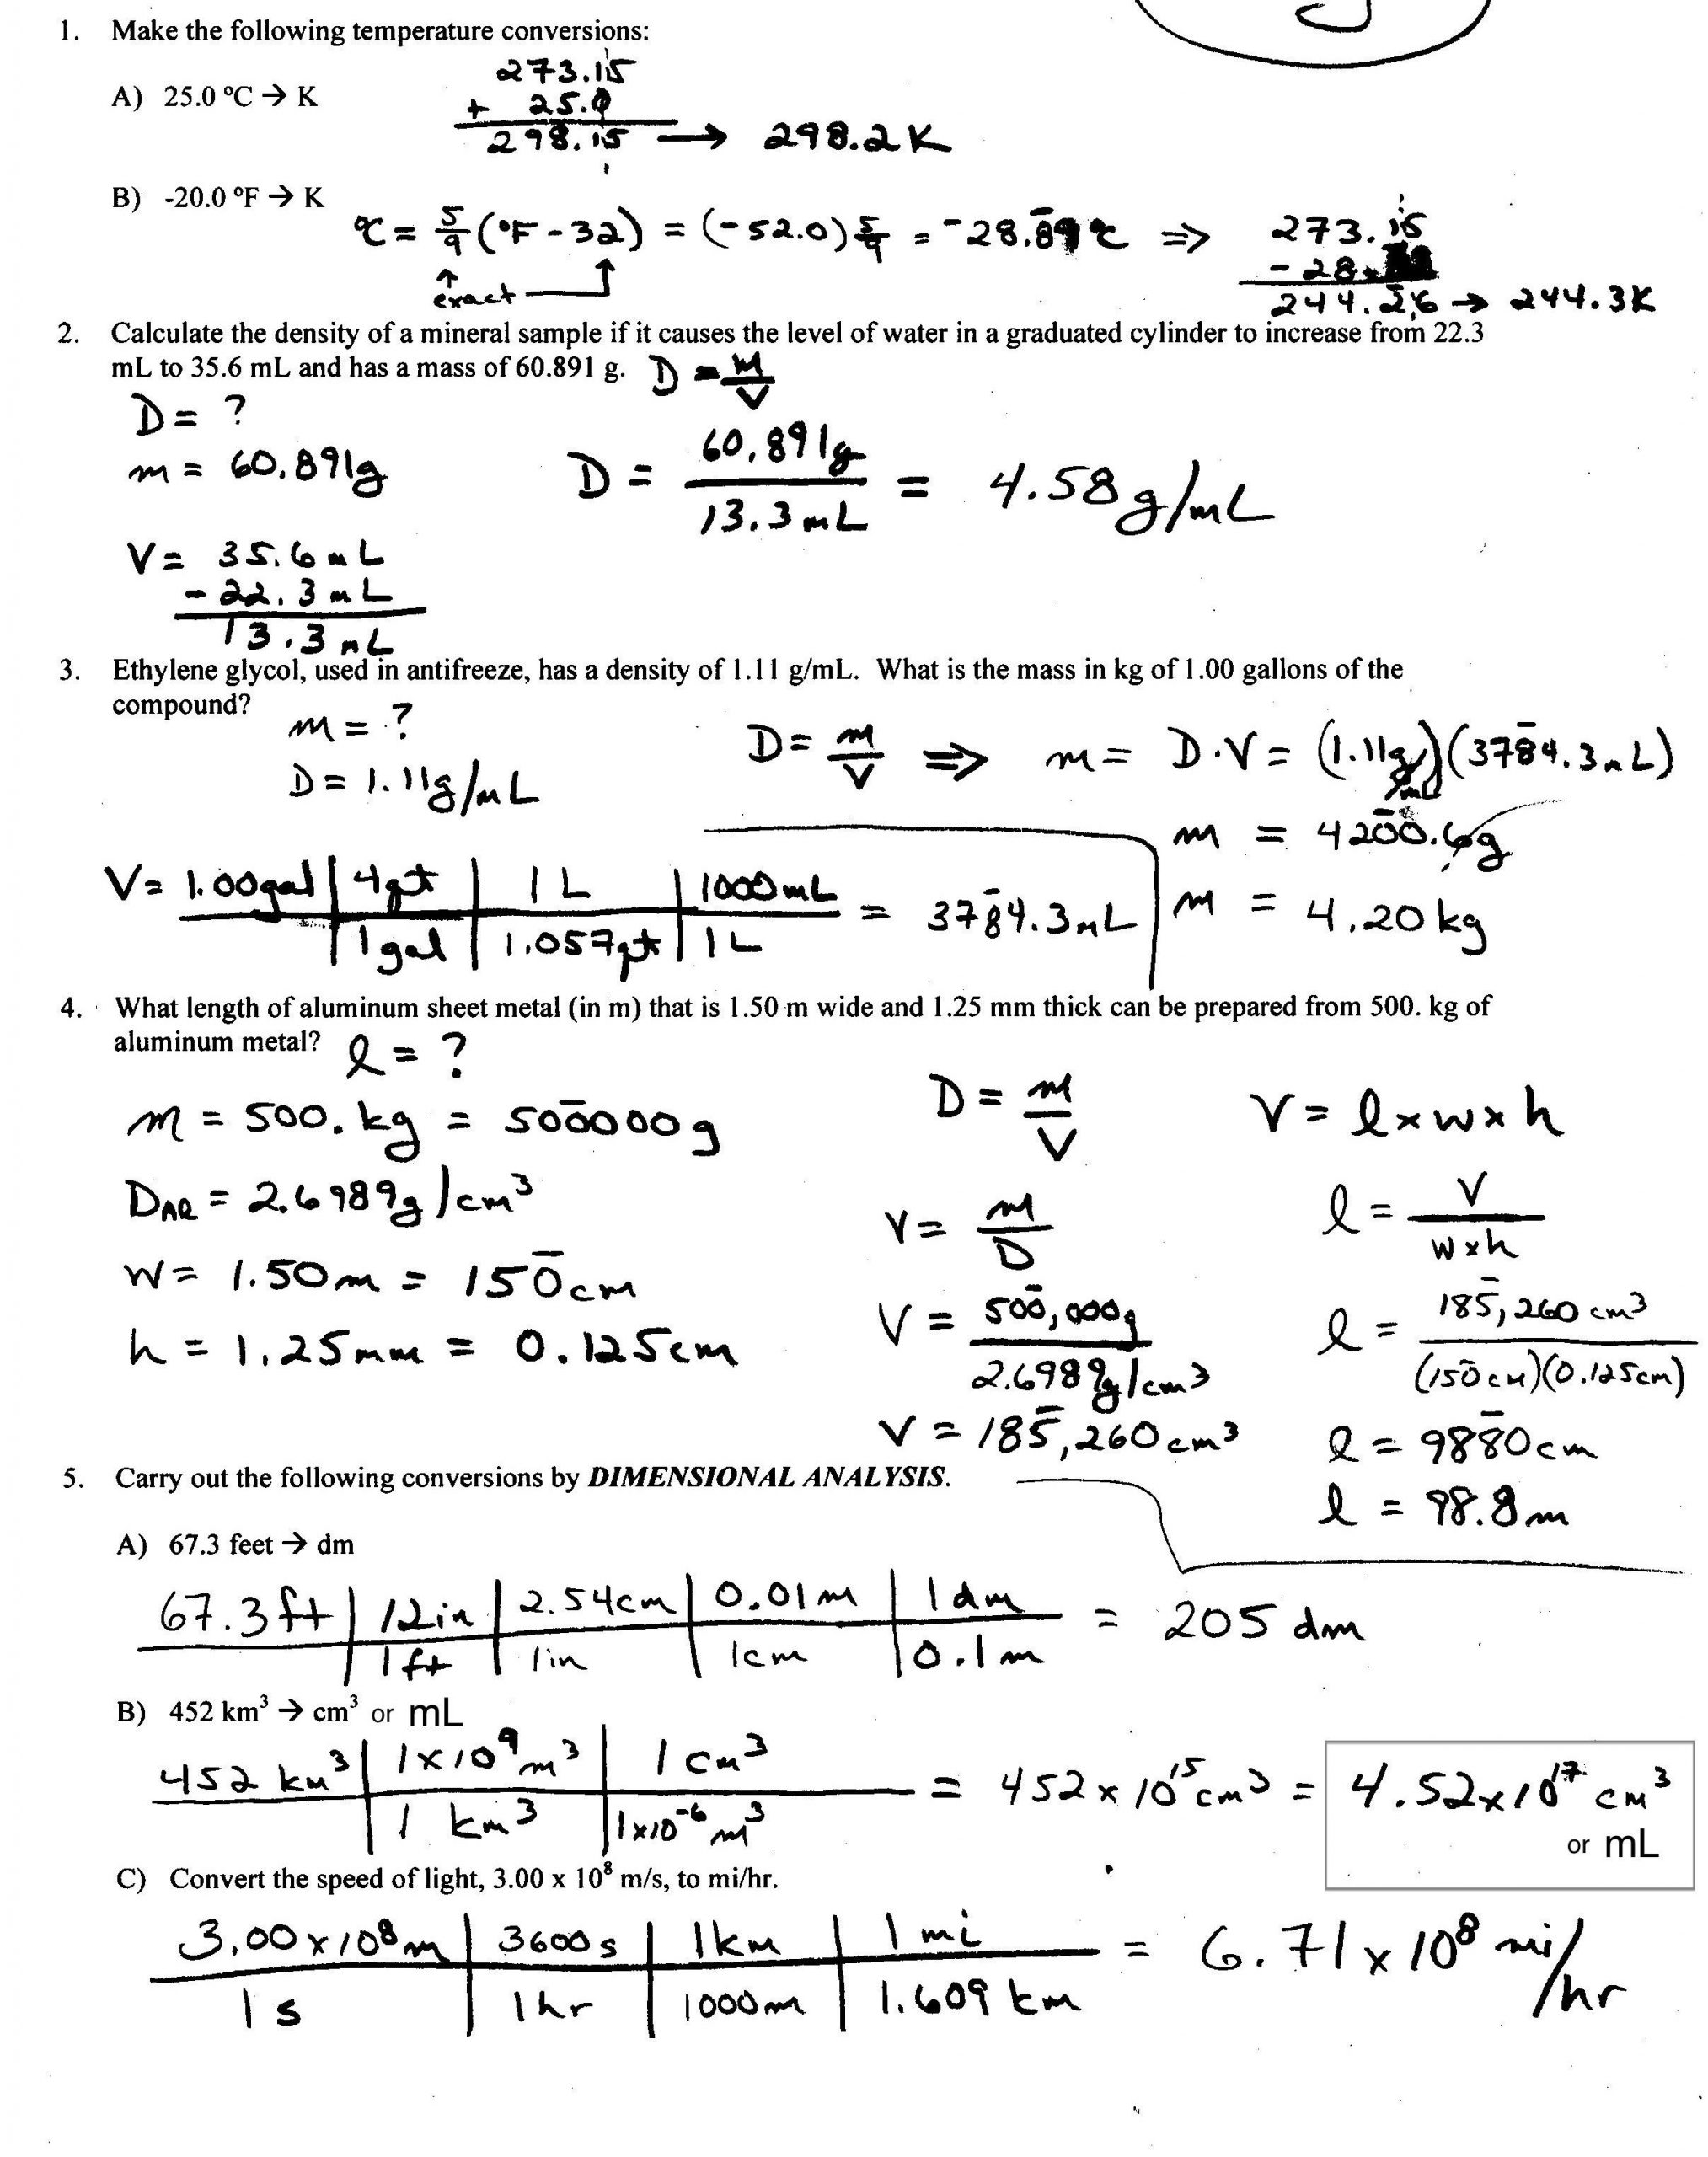 Dimensional Analysis Worksheet Answers Chemistry Density Worksheet with Answers Calculate Density Worksheet